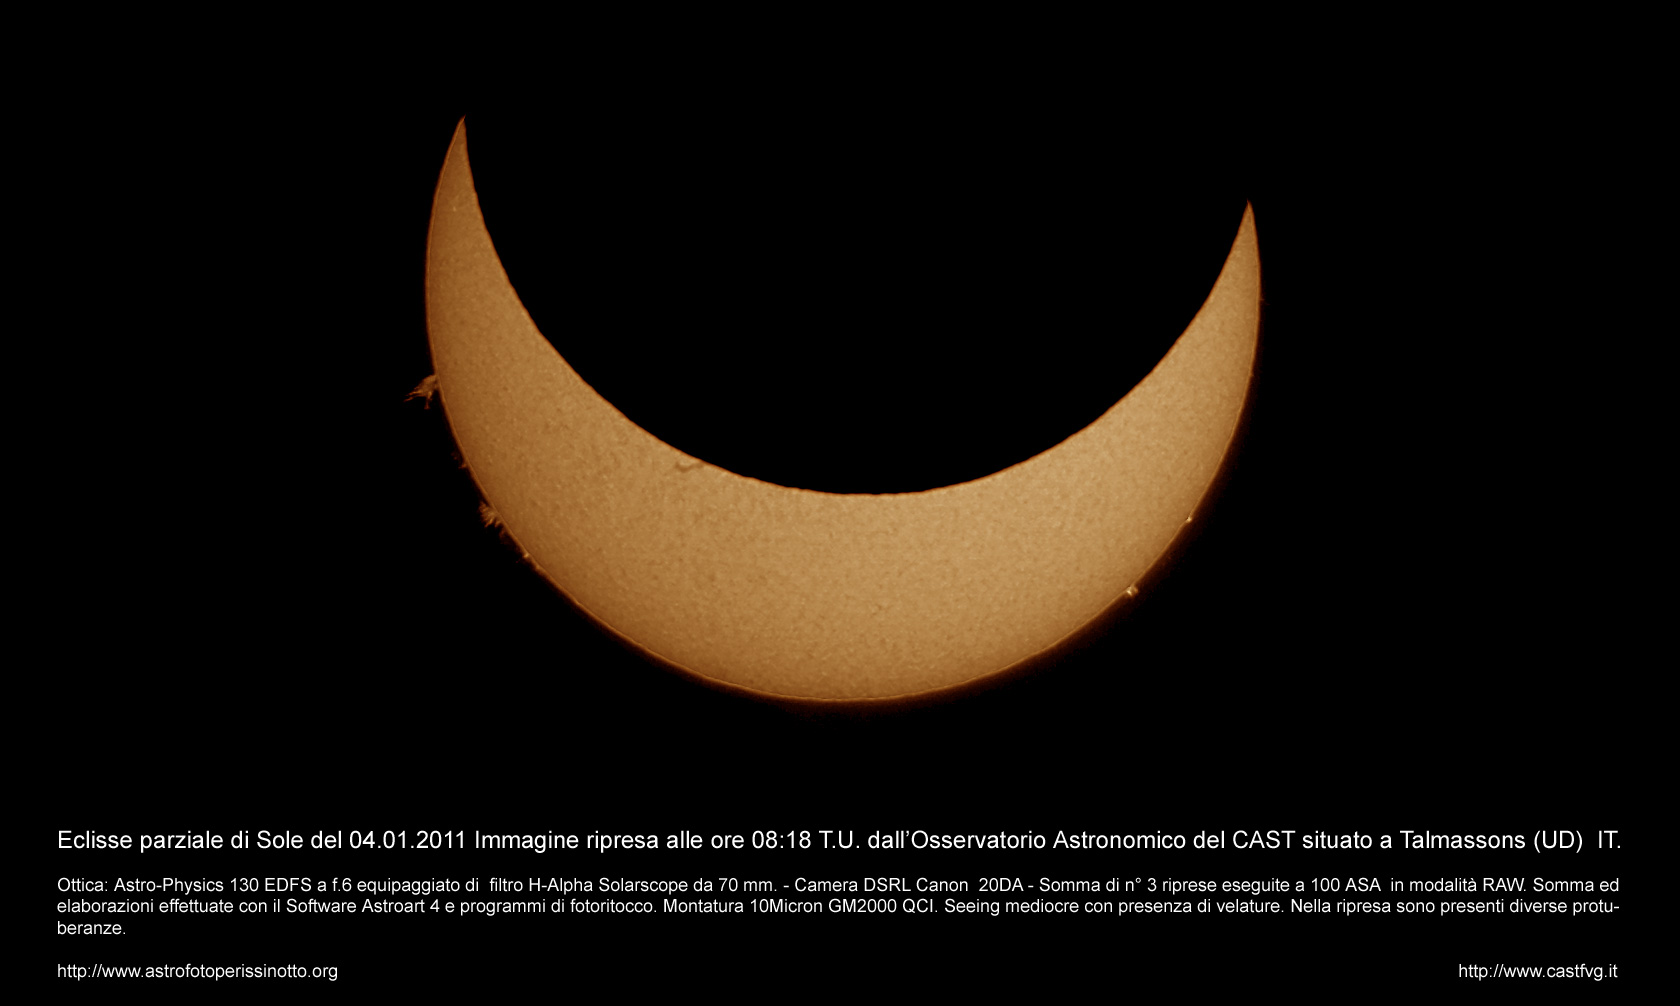 Partial sun eclipse photographed from Talmassons by Enrico Perissinotto: 162 KB